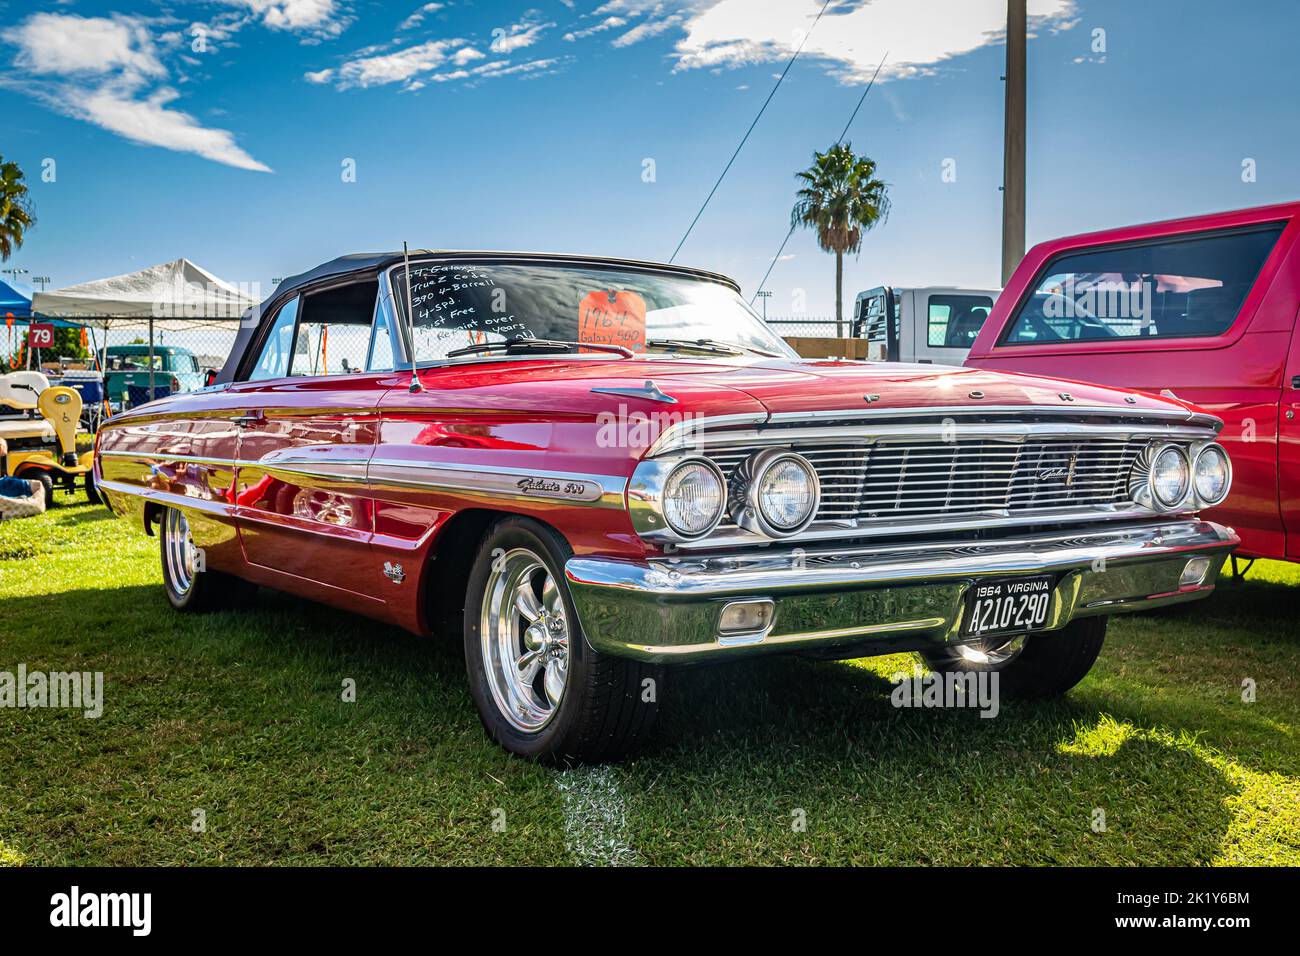 Daytona Beach, FL - November 28, 2020: Low perspective front corner view of a 1964 Ford Galaxie 500 Convertible at a local car show. Stock Photo